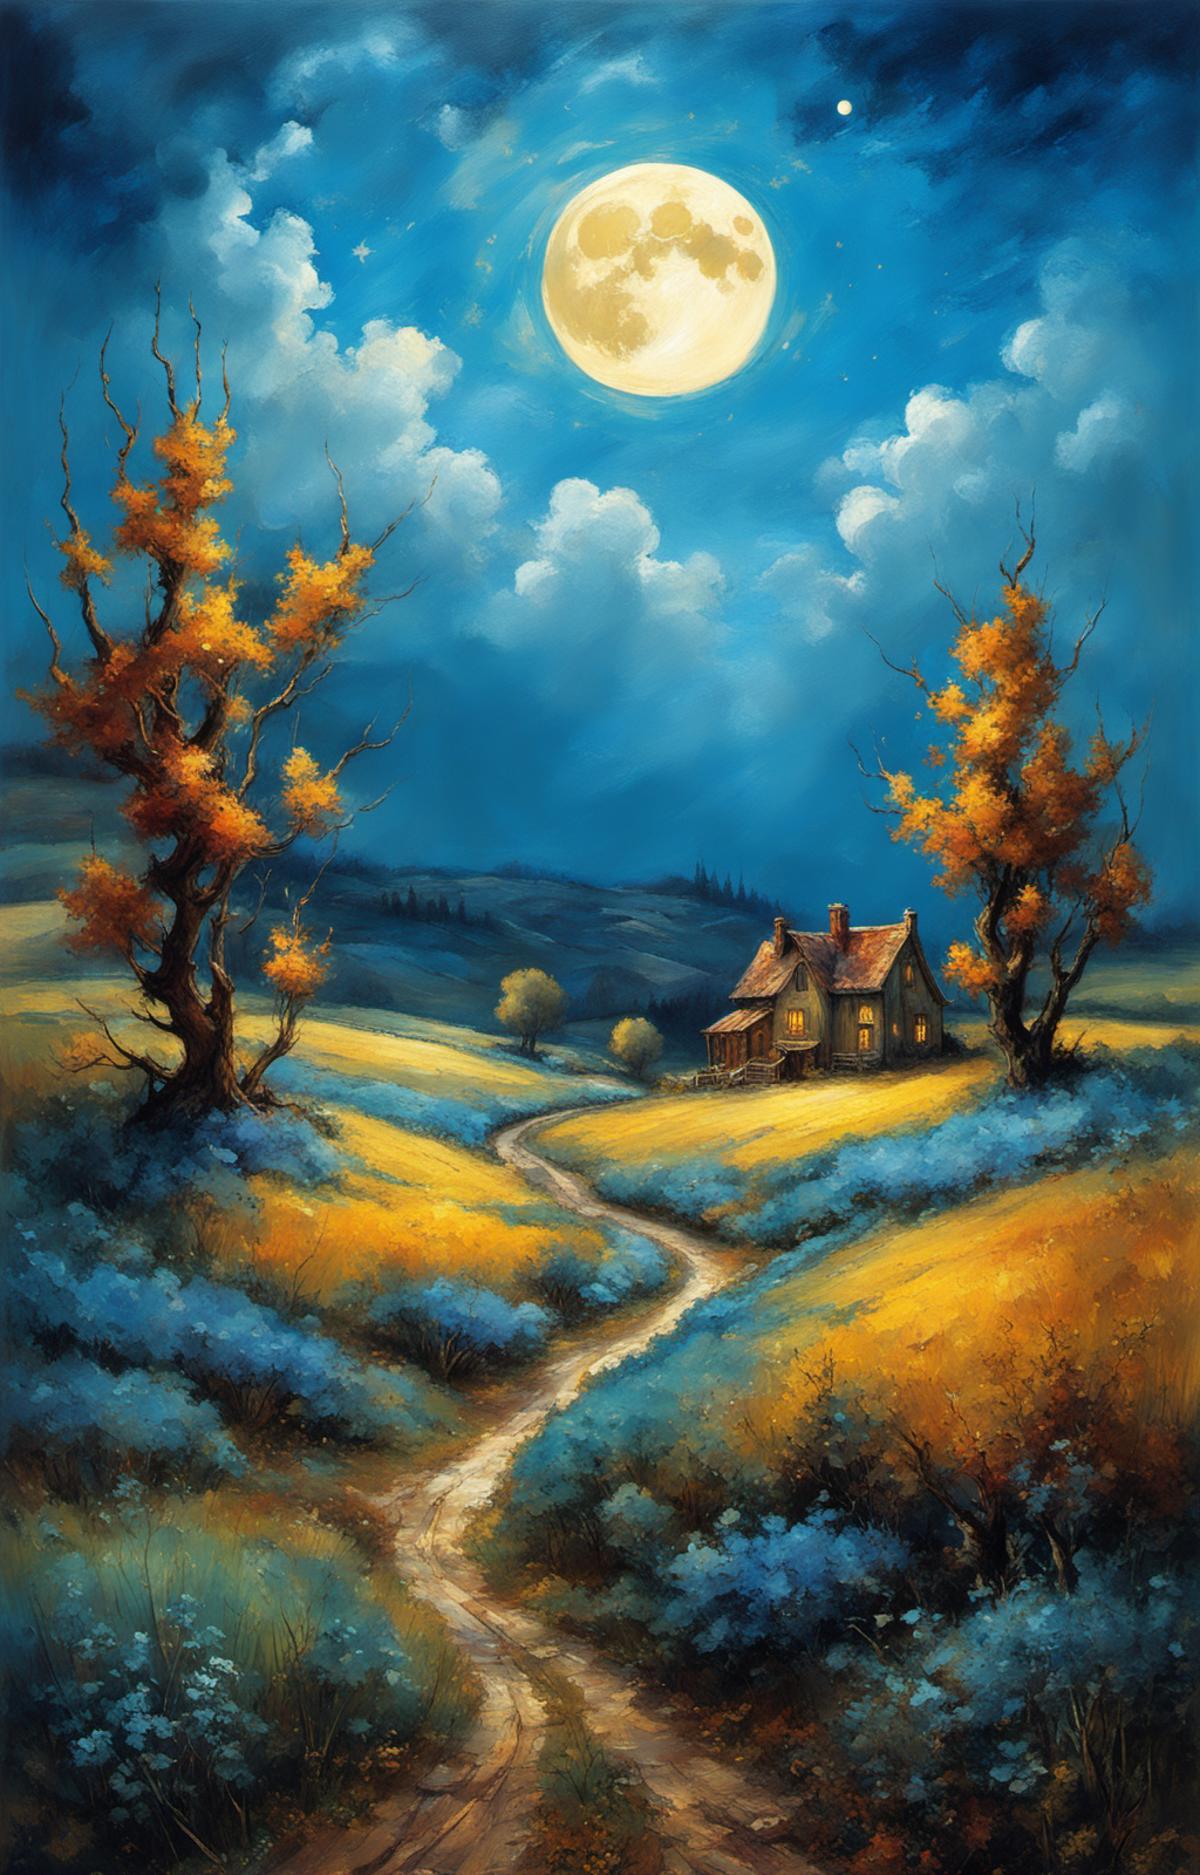 A painting of a country road leading to a house with a full moon in the sky.